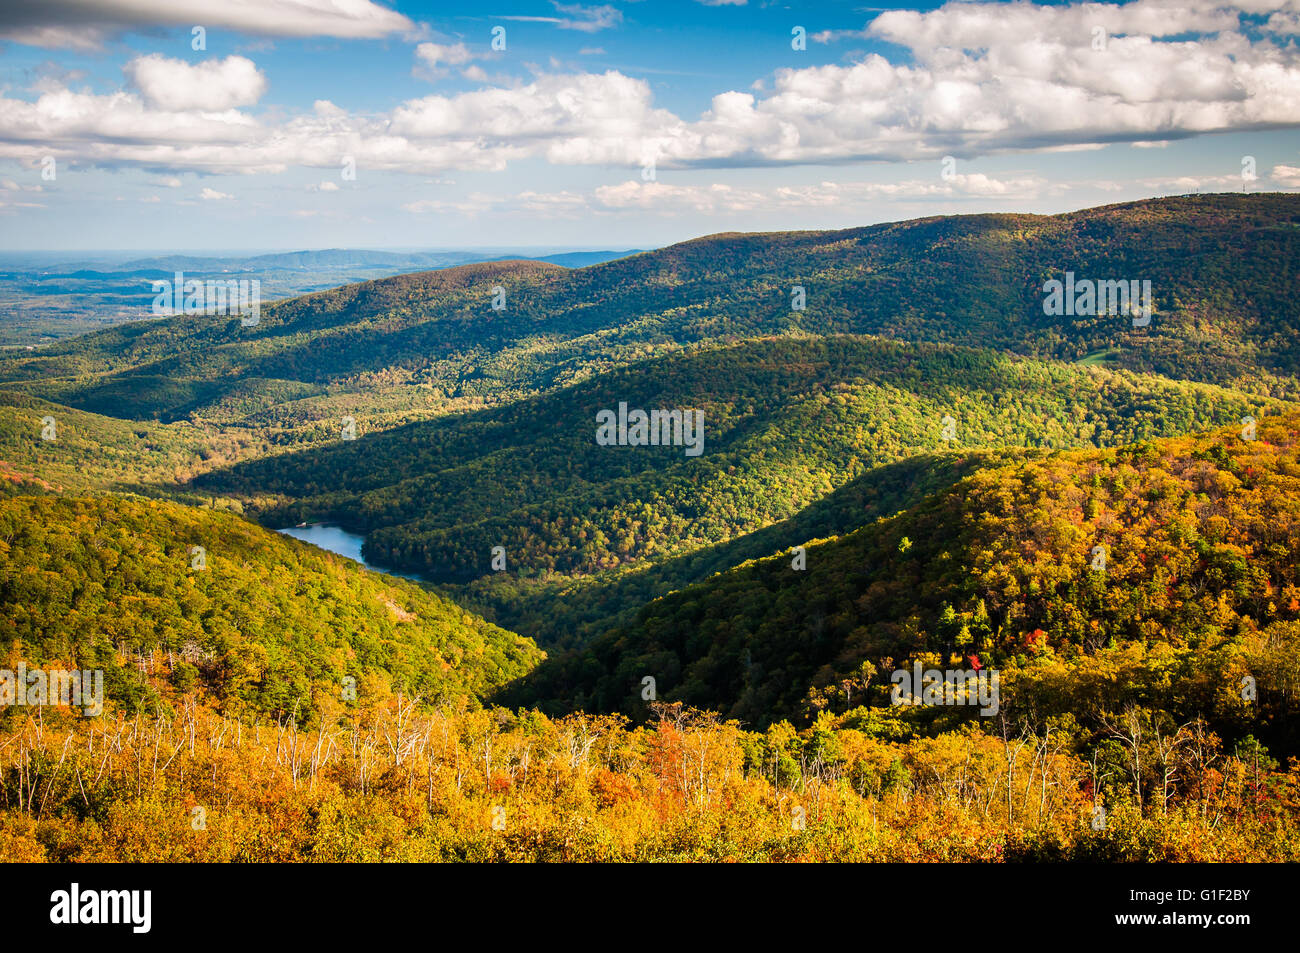 Early autumn view of the Appalachians from Moormans River Overlook, Shenandoah National Park, Virginia. Stock Photo